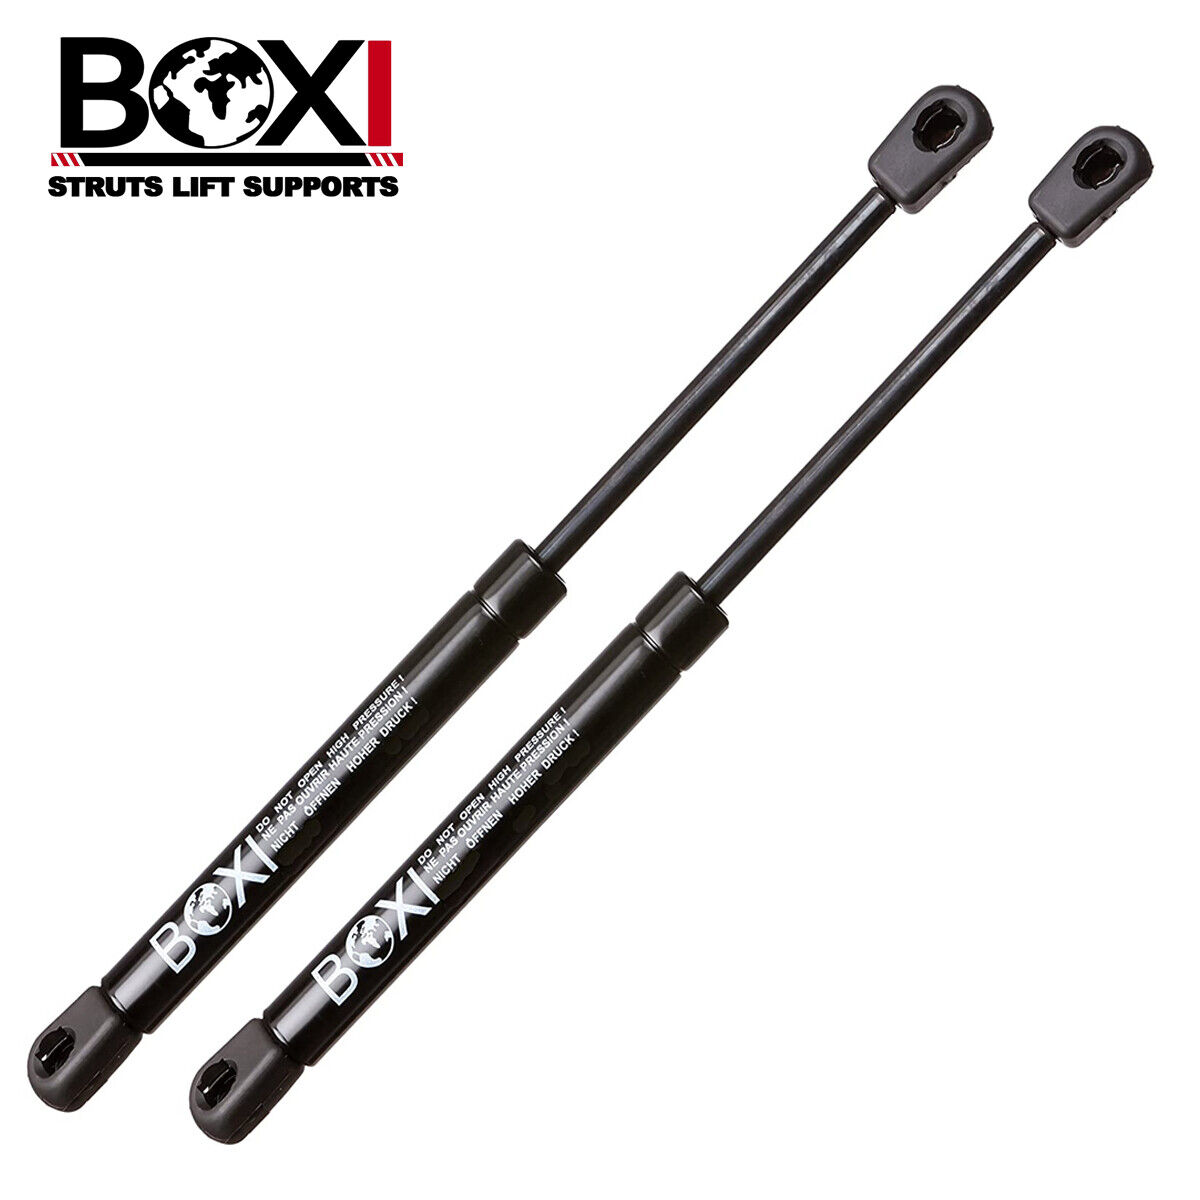 1PAIR 4069 TRUNK LIFT SUPPORTS GAS SHOCKS STRUTS FITS 2005-2009 BUICK LACROSSE